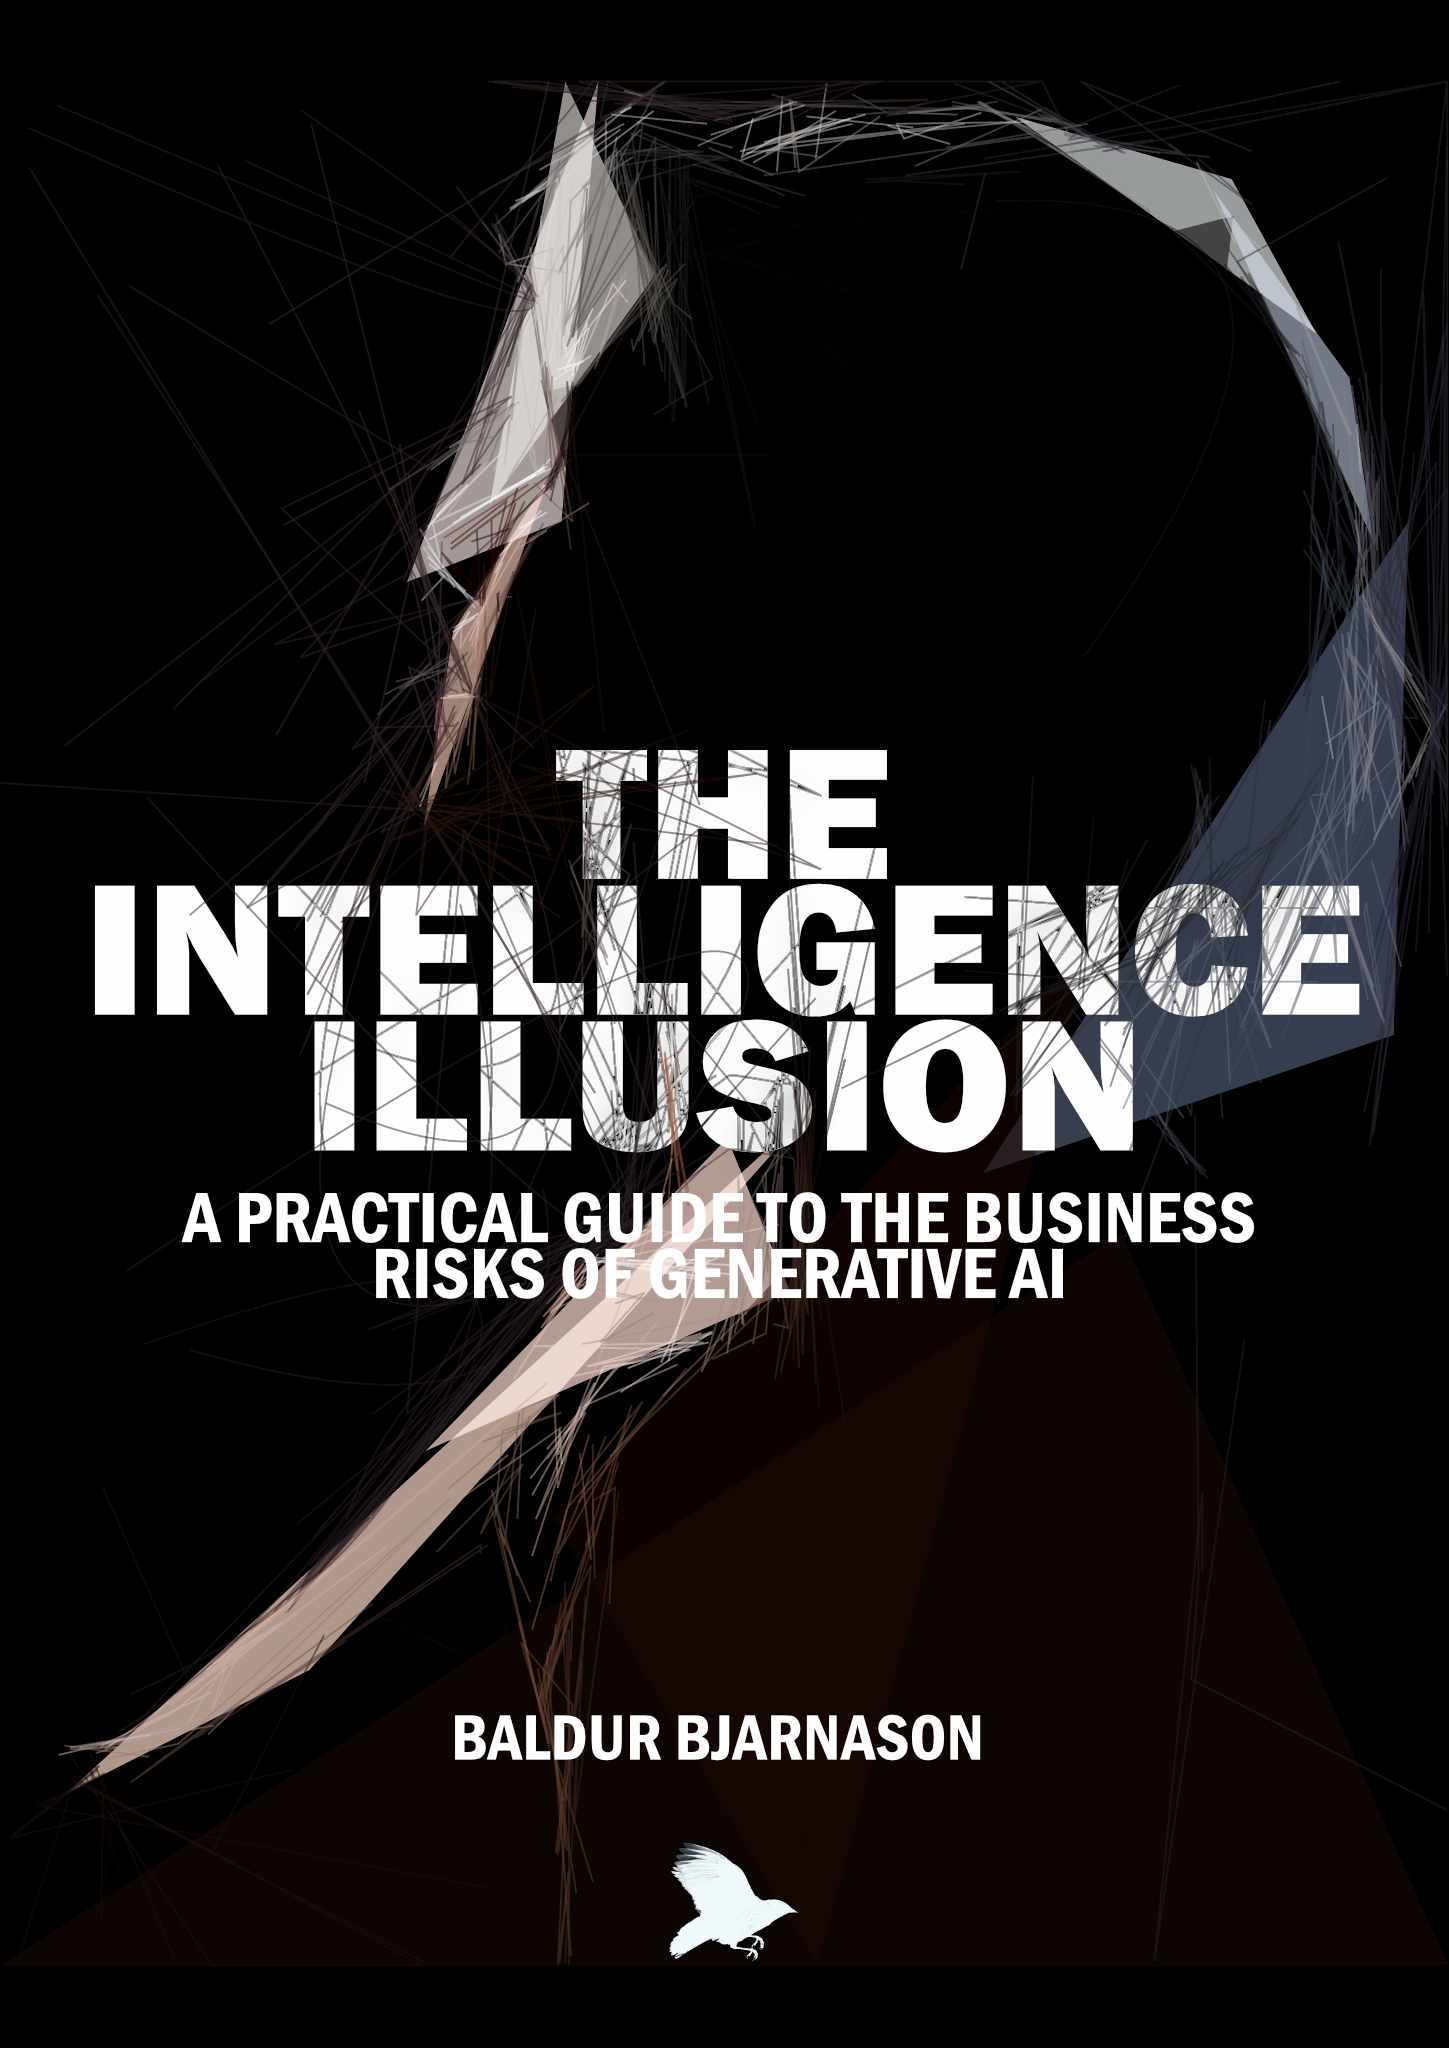 Cover for the book 'The Intelligence Illusion'